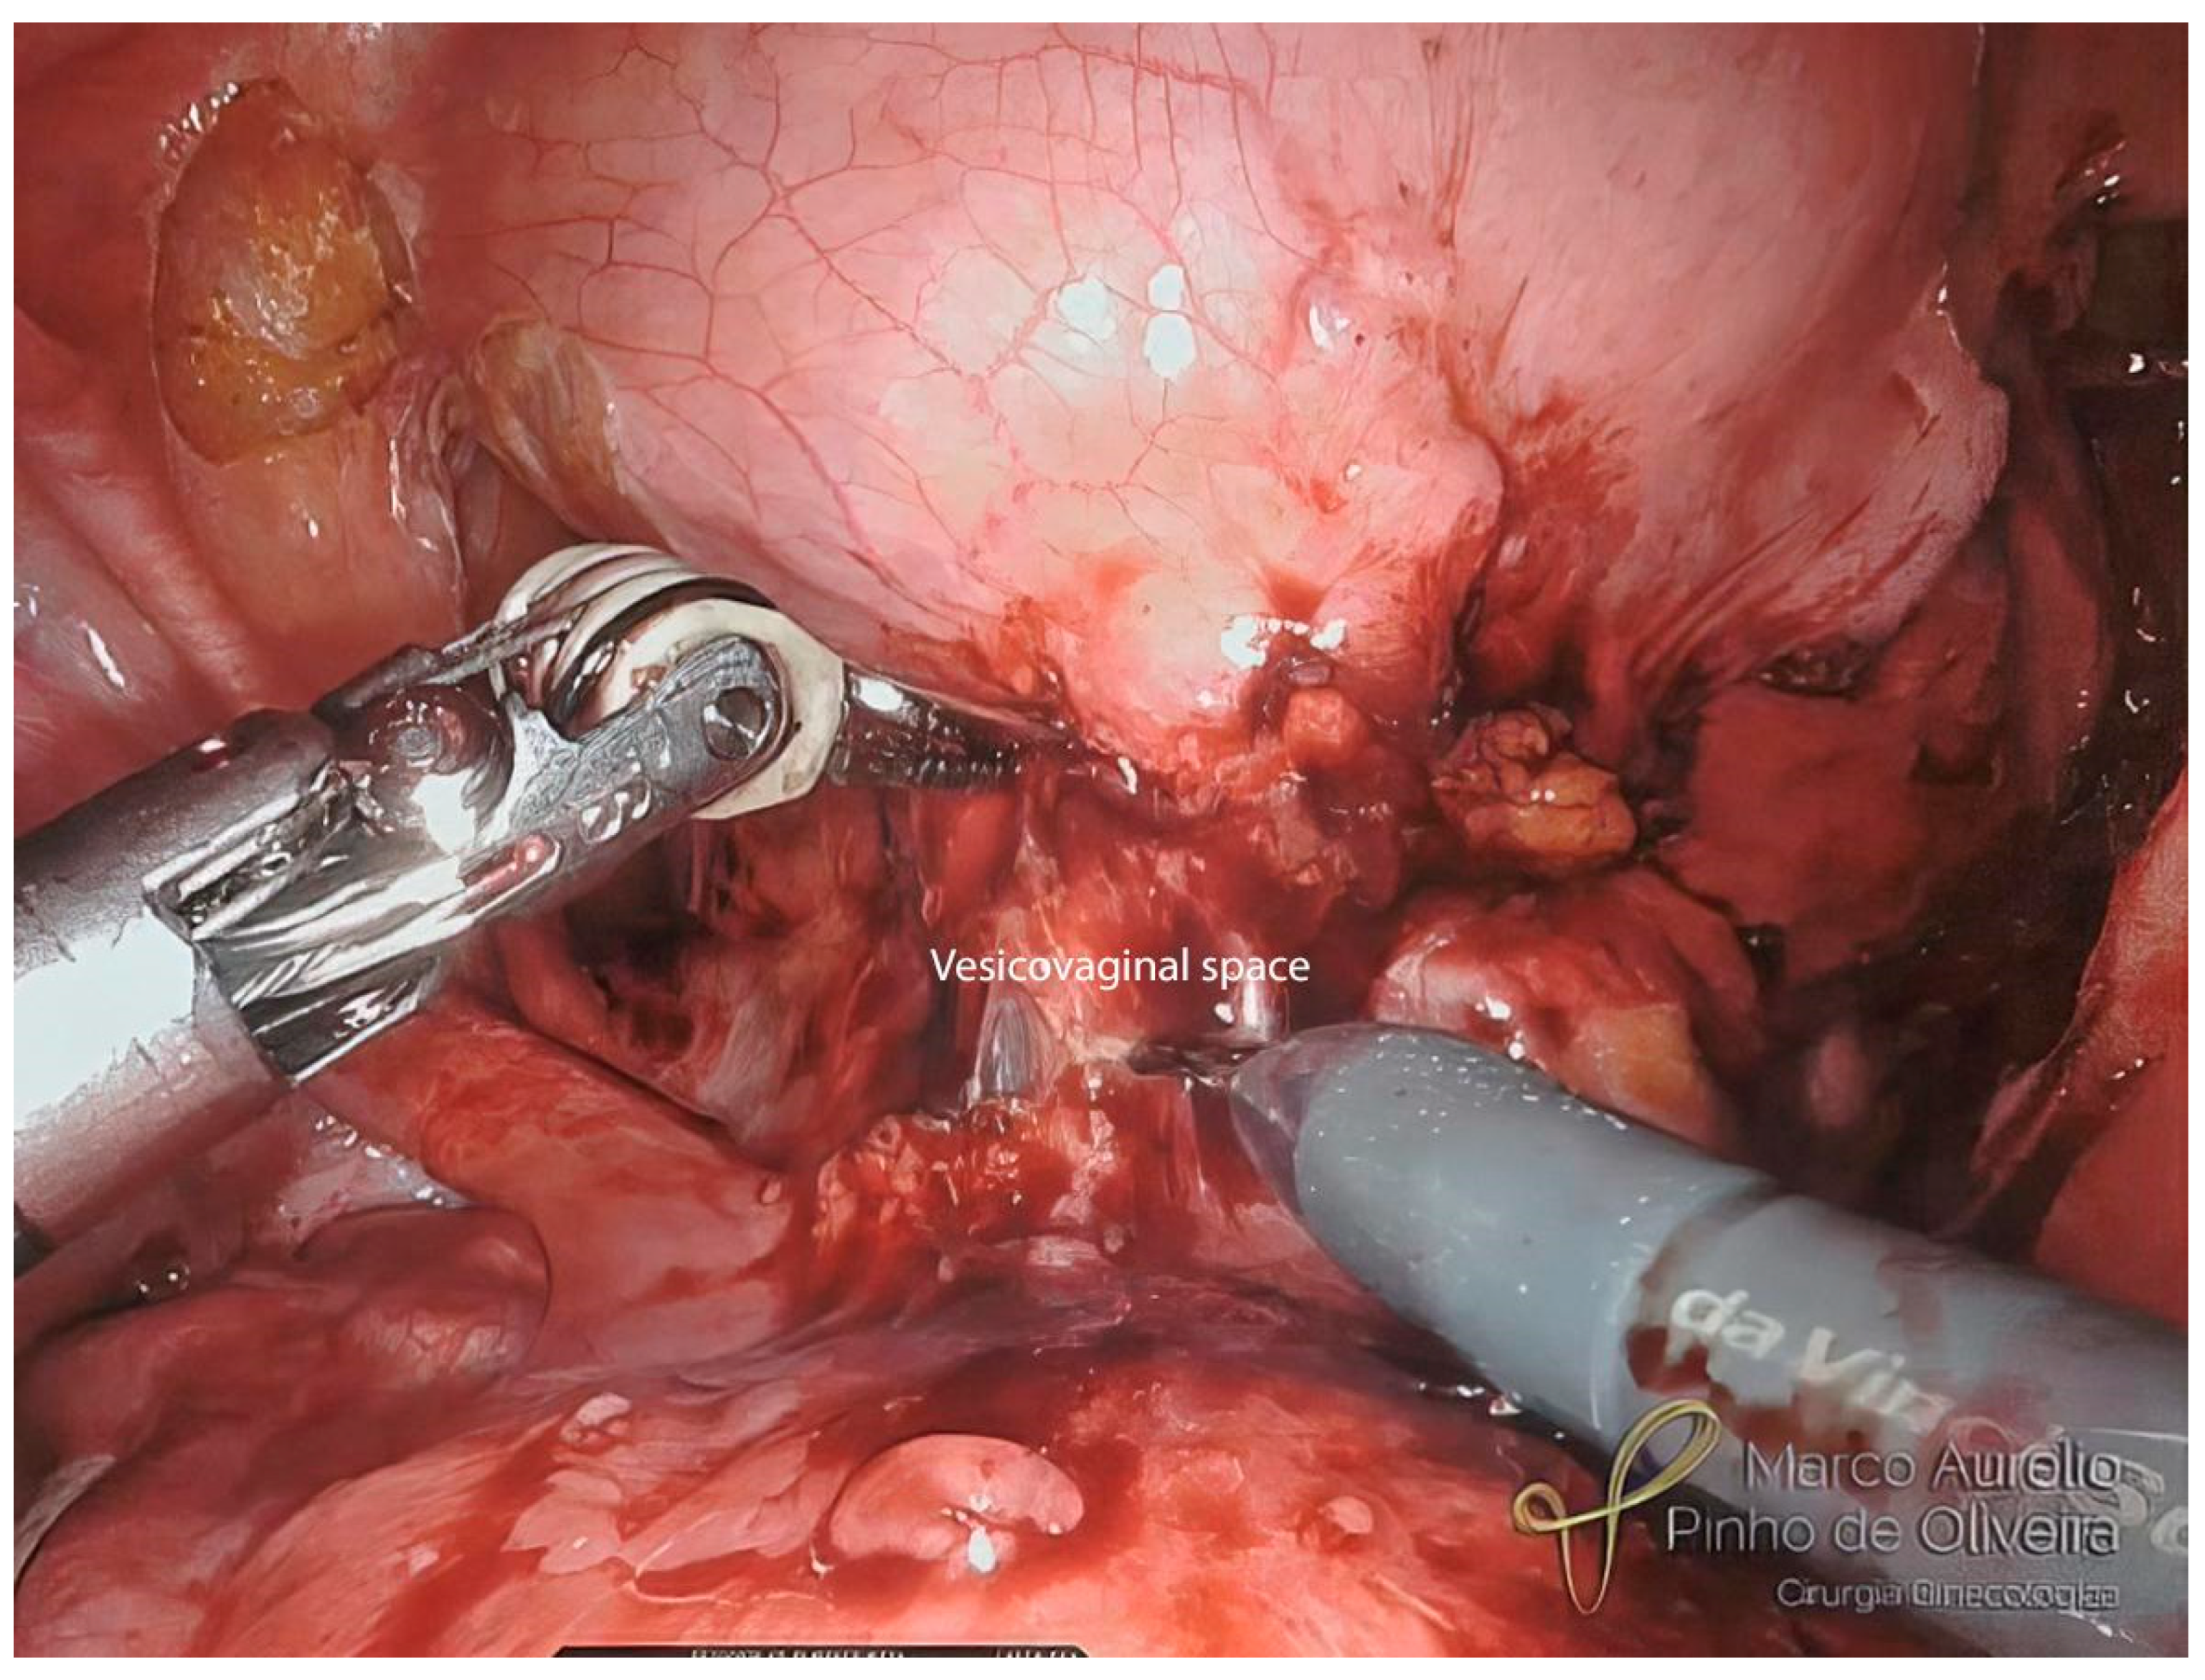 Laparoendoscopic single-site surgery for deep infiltrating